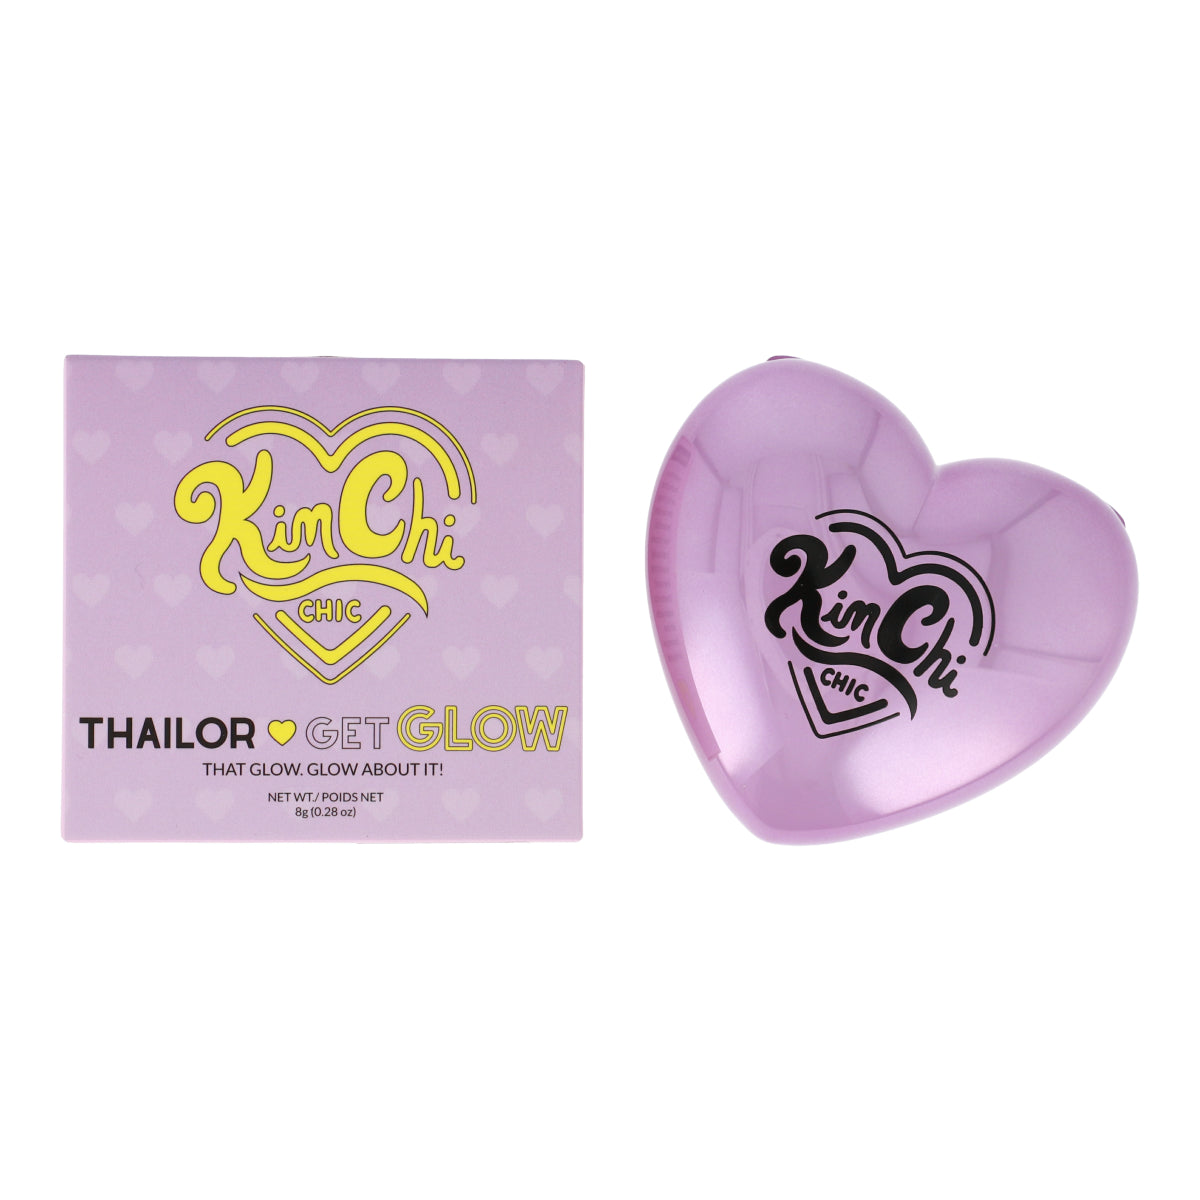 Thailor Get Glow Highlighter 03 Hollywood Glow